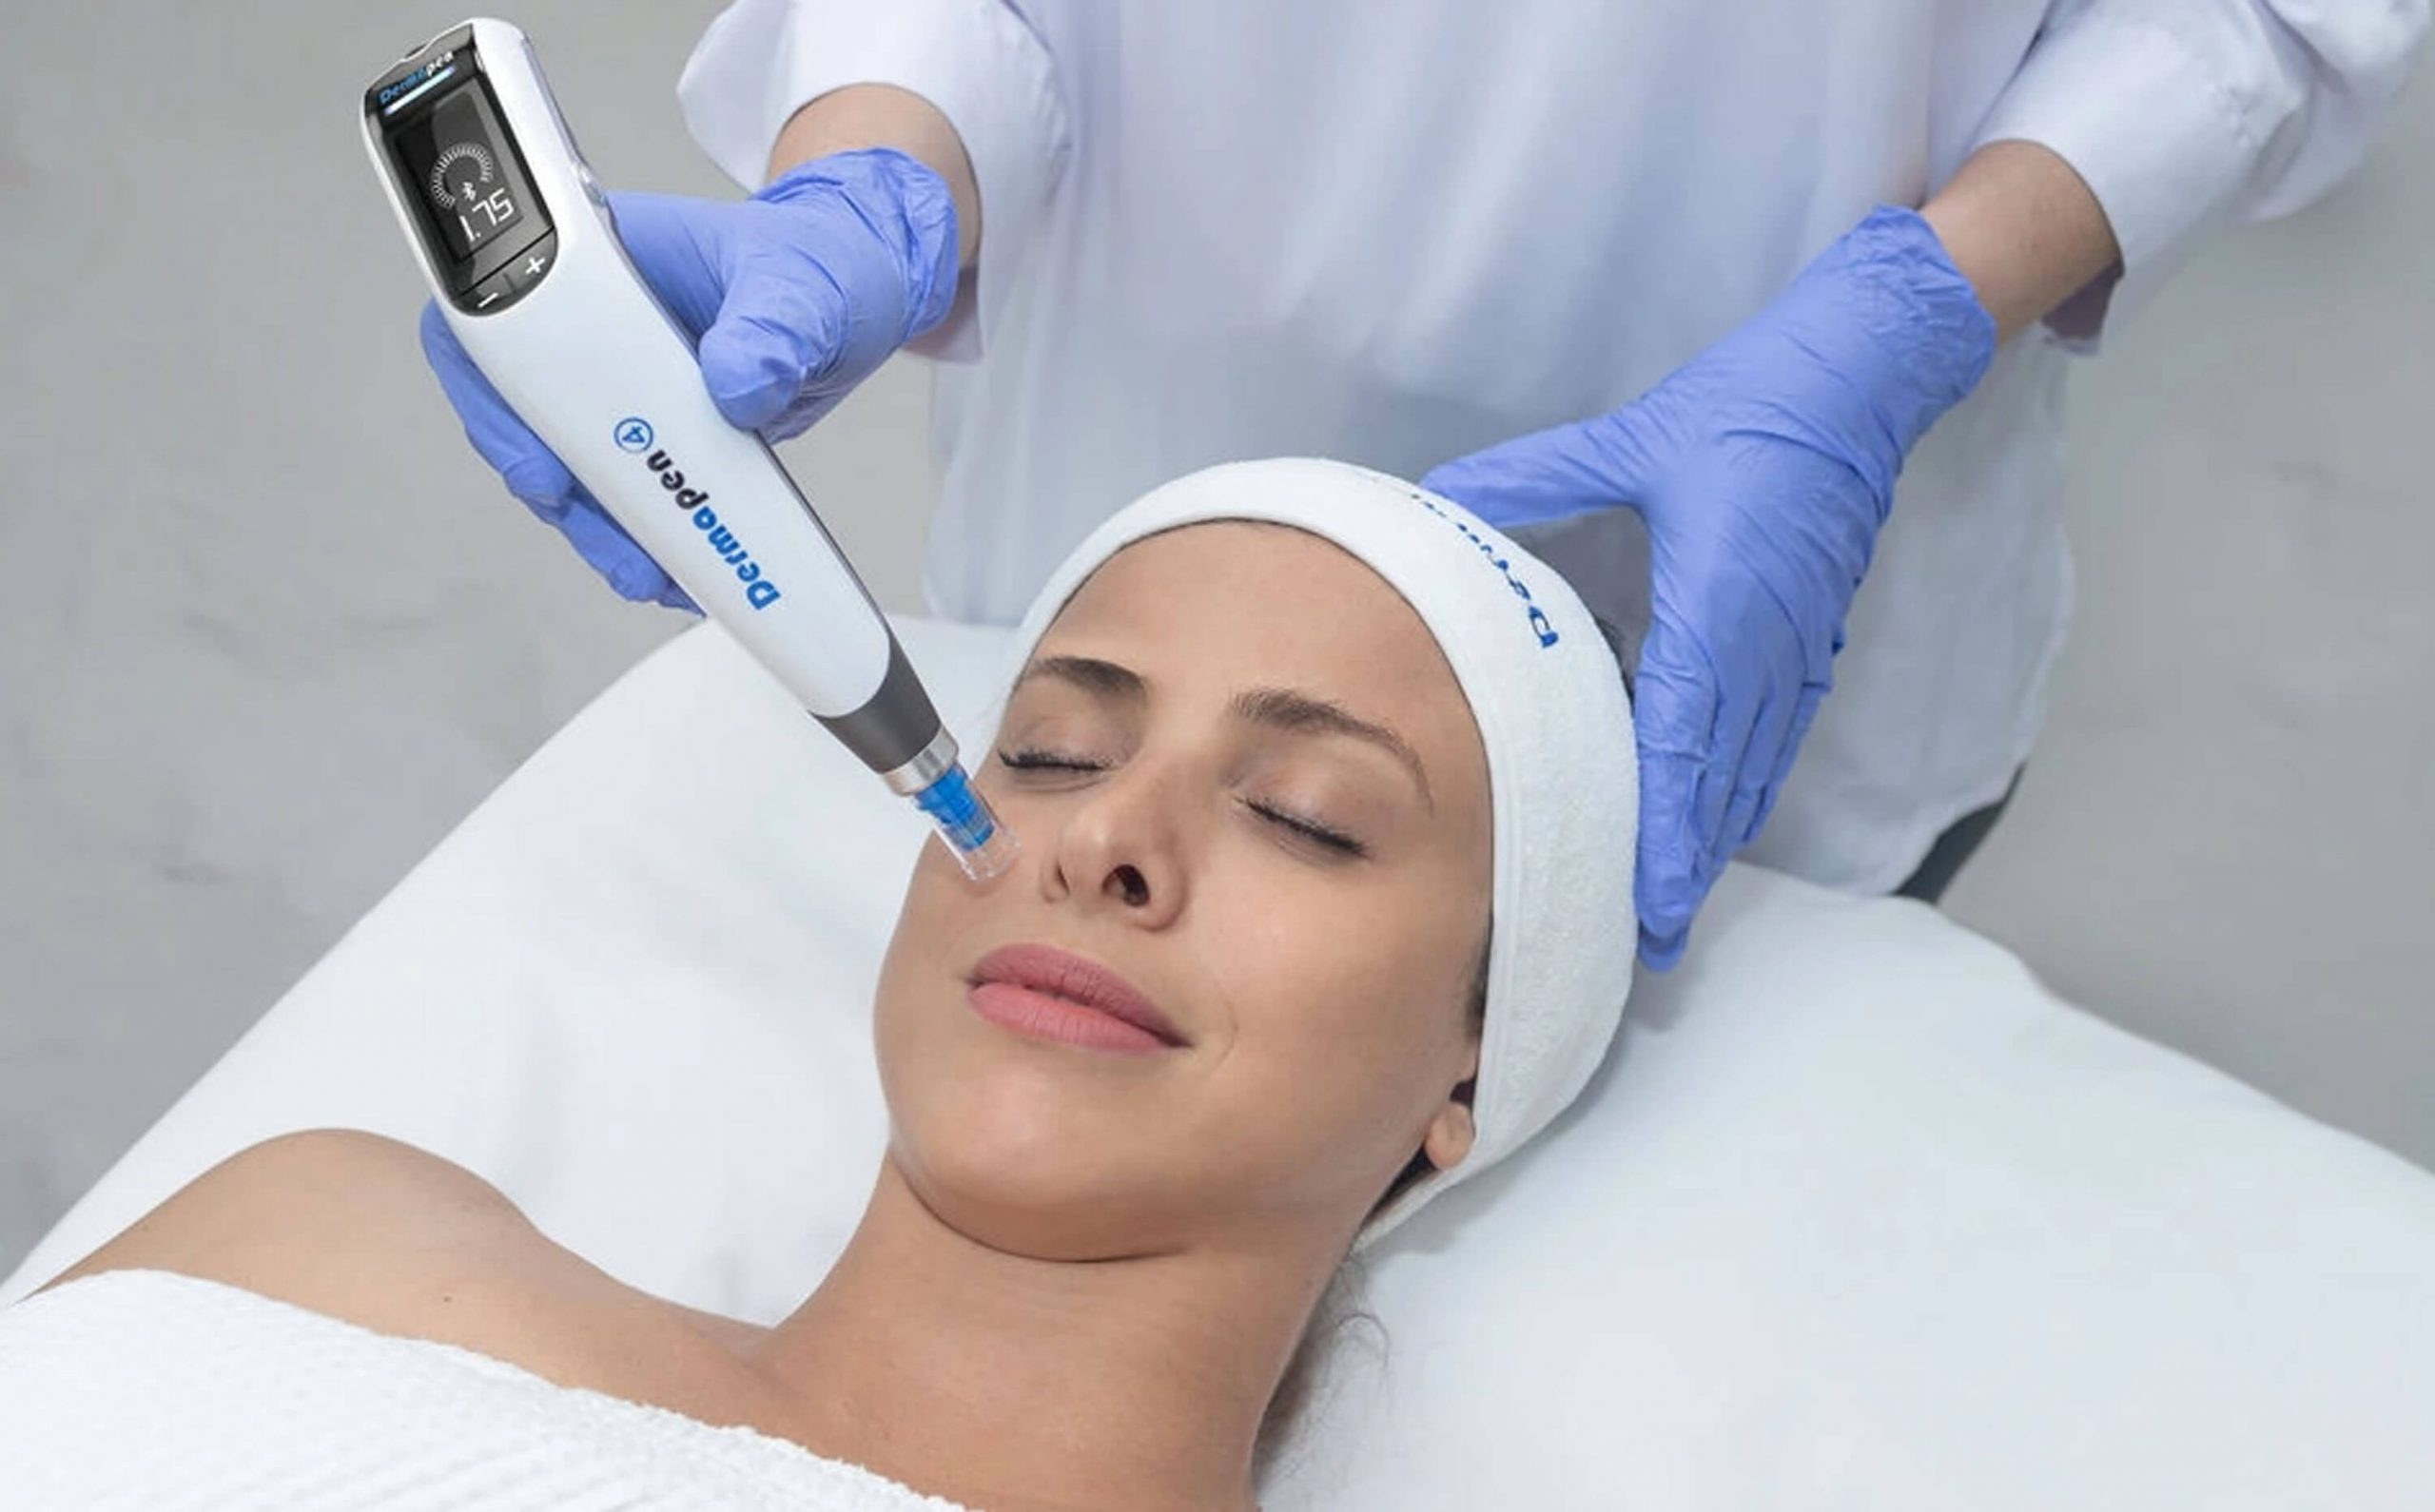 A doctor performing skin treatments using Dermapen.